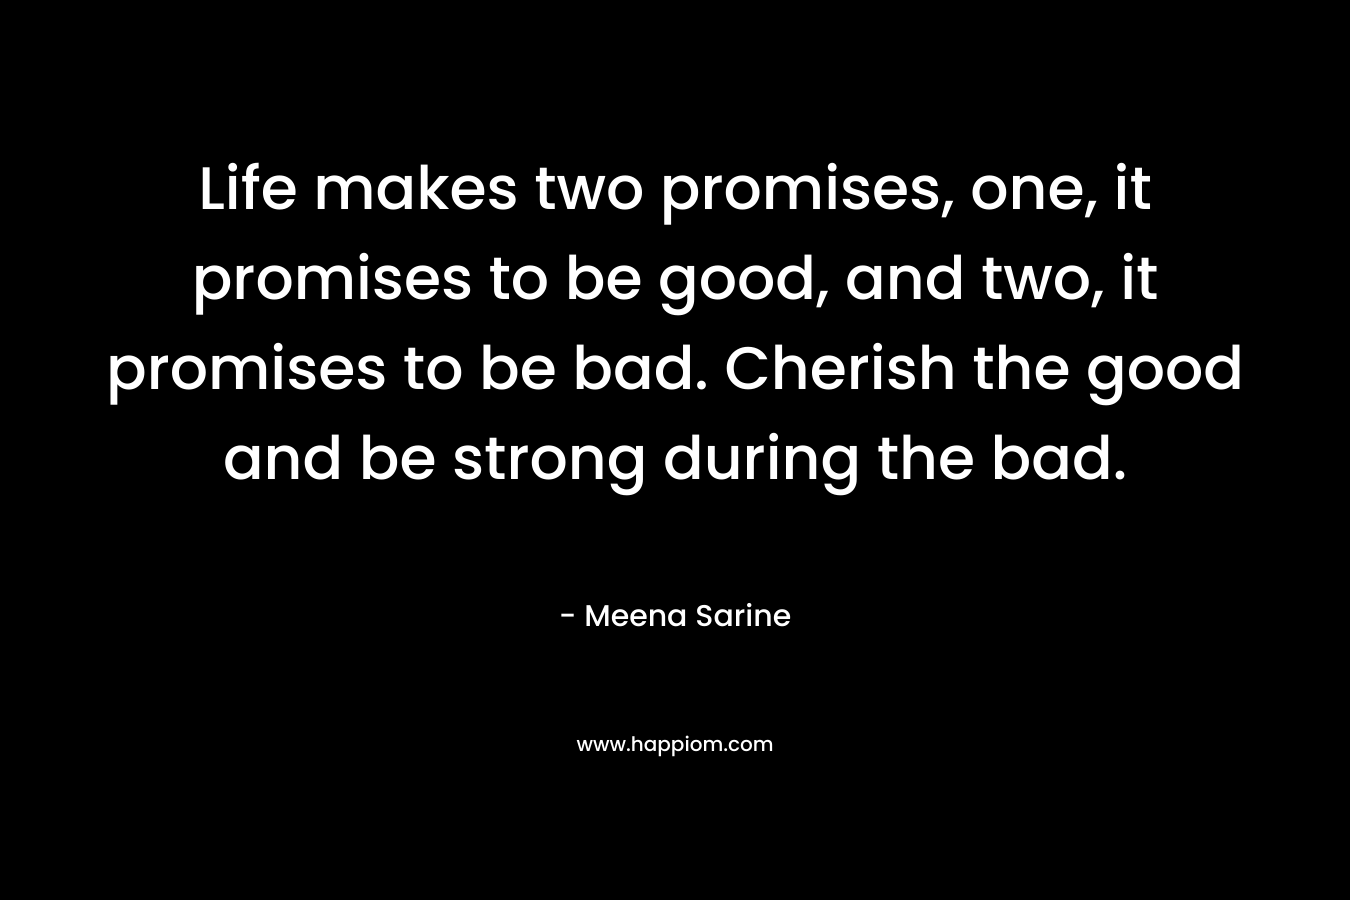 Life makes two promises, one, it promises to be good, and two, it promises to be bad. Cherish the good and be strong during the bad. – Meena Sarine